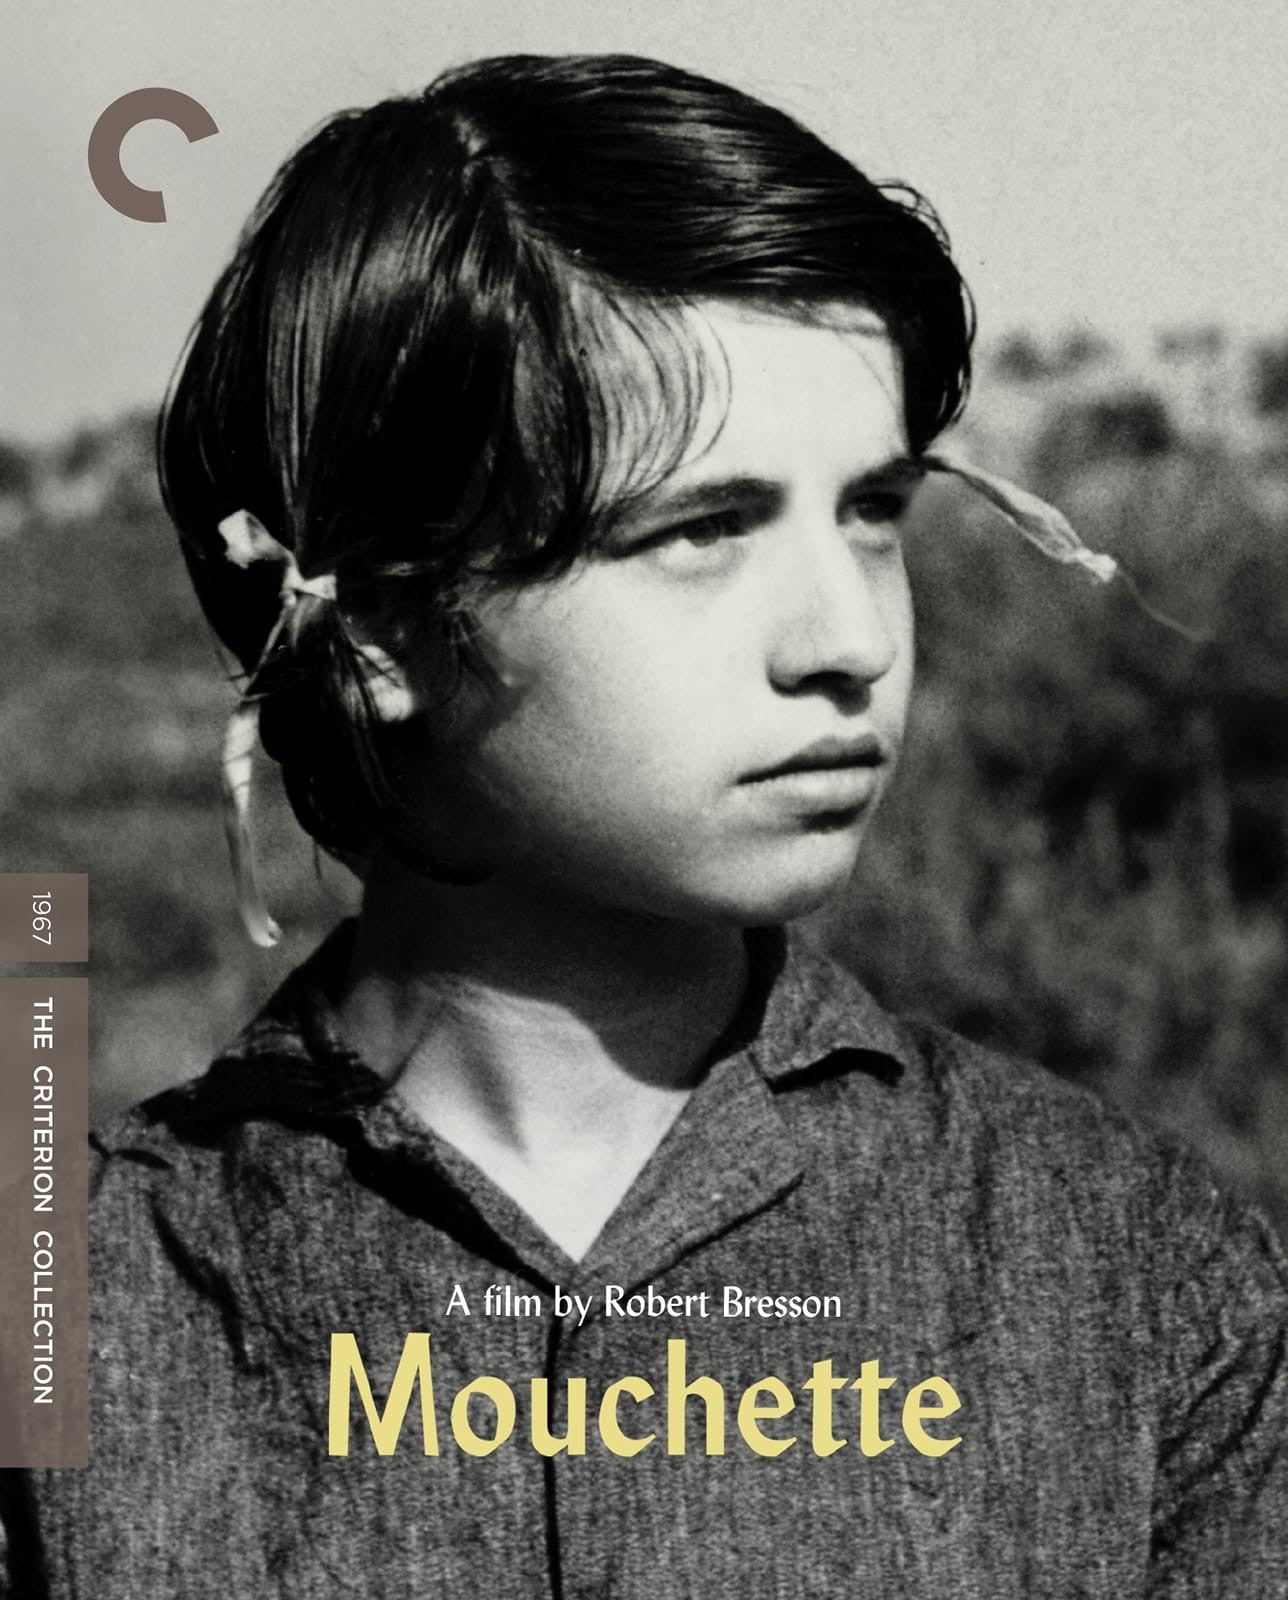 Mouchette - Criterion Collection (Blu-Ray)